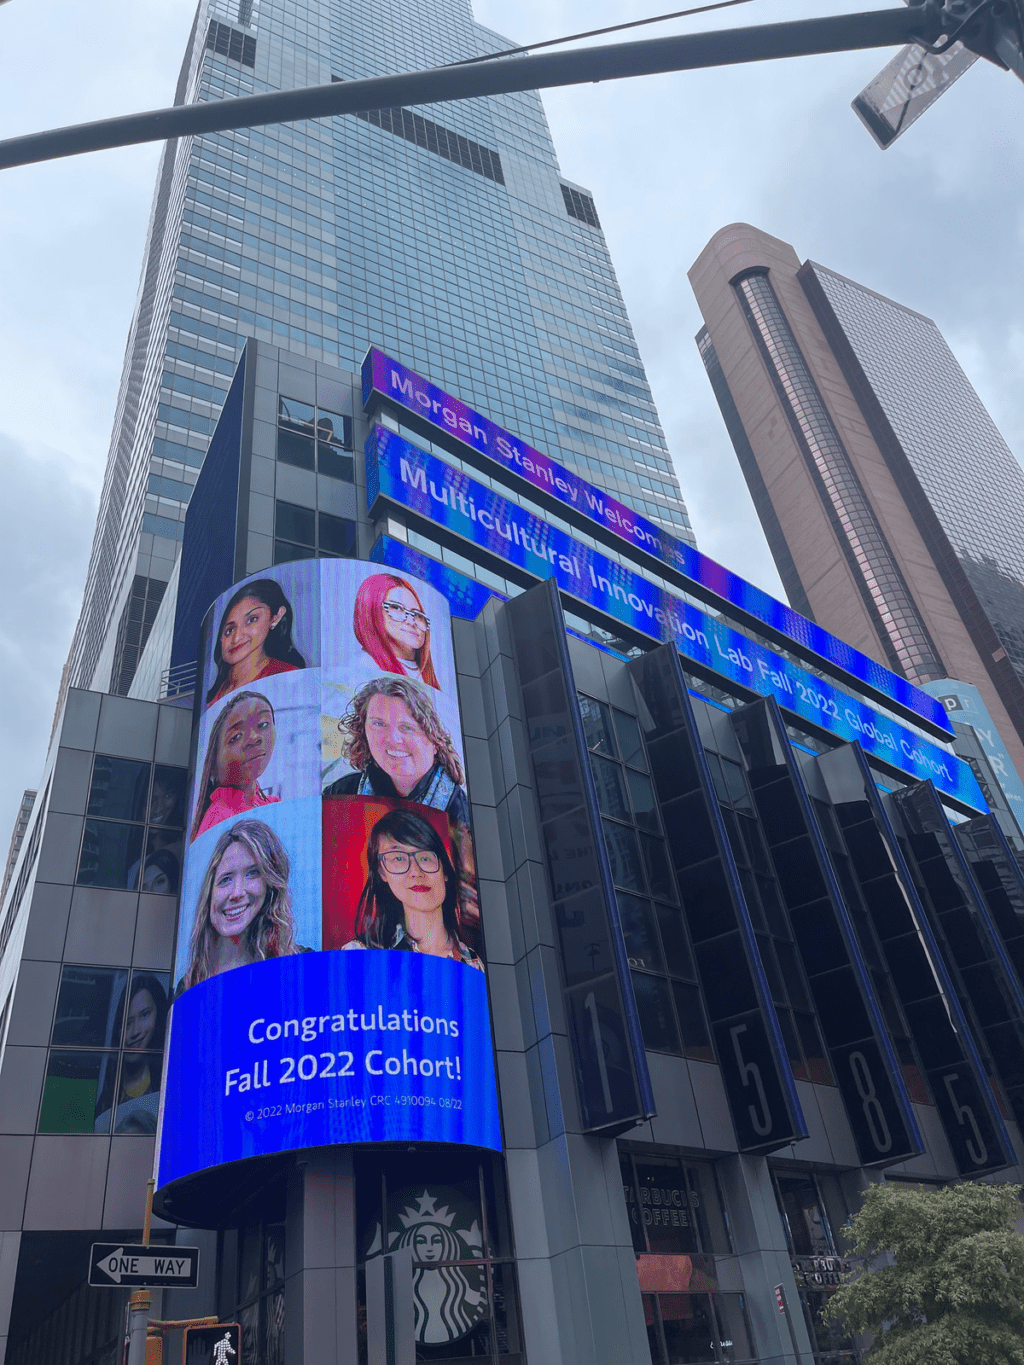 Picture taken in New York, Times Square of WeArisma CEO Jenny Tsai featuring on Morgan Stanley billboard 